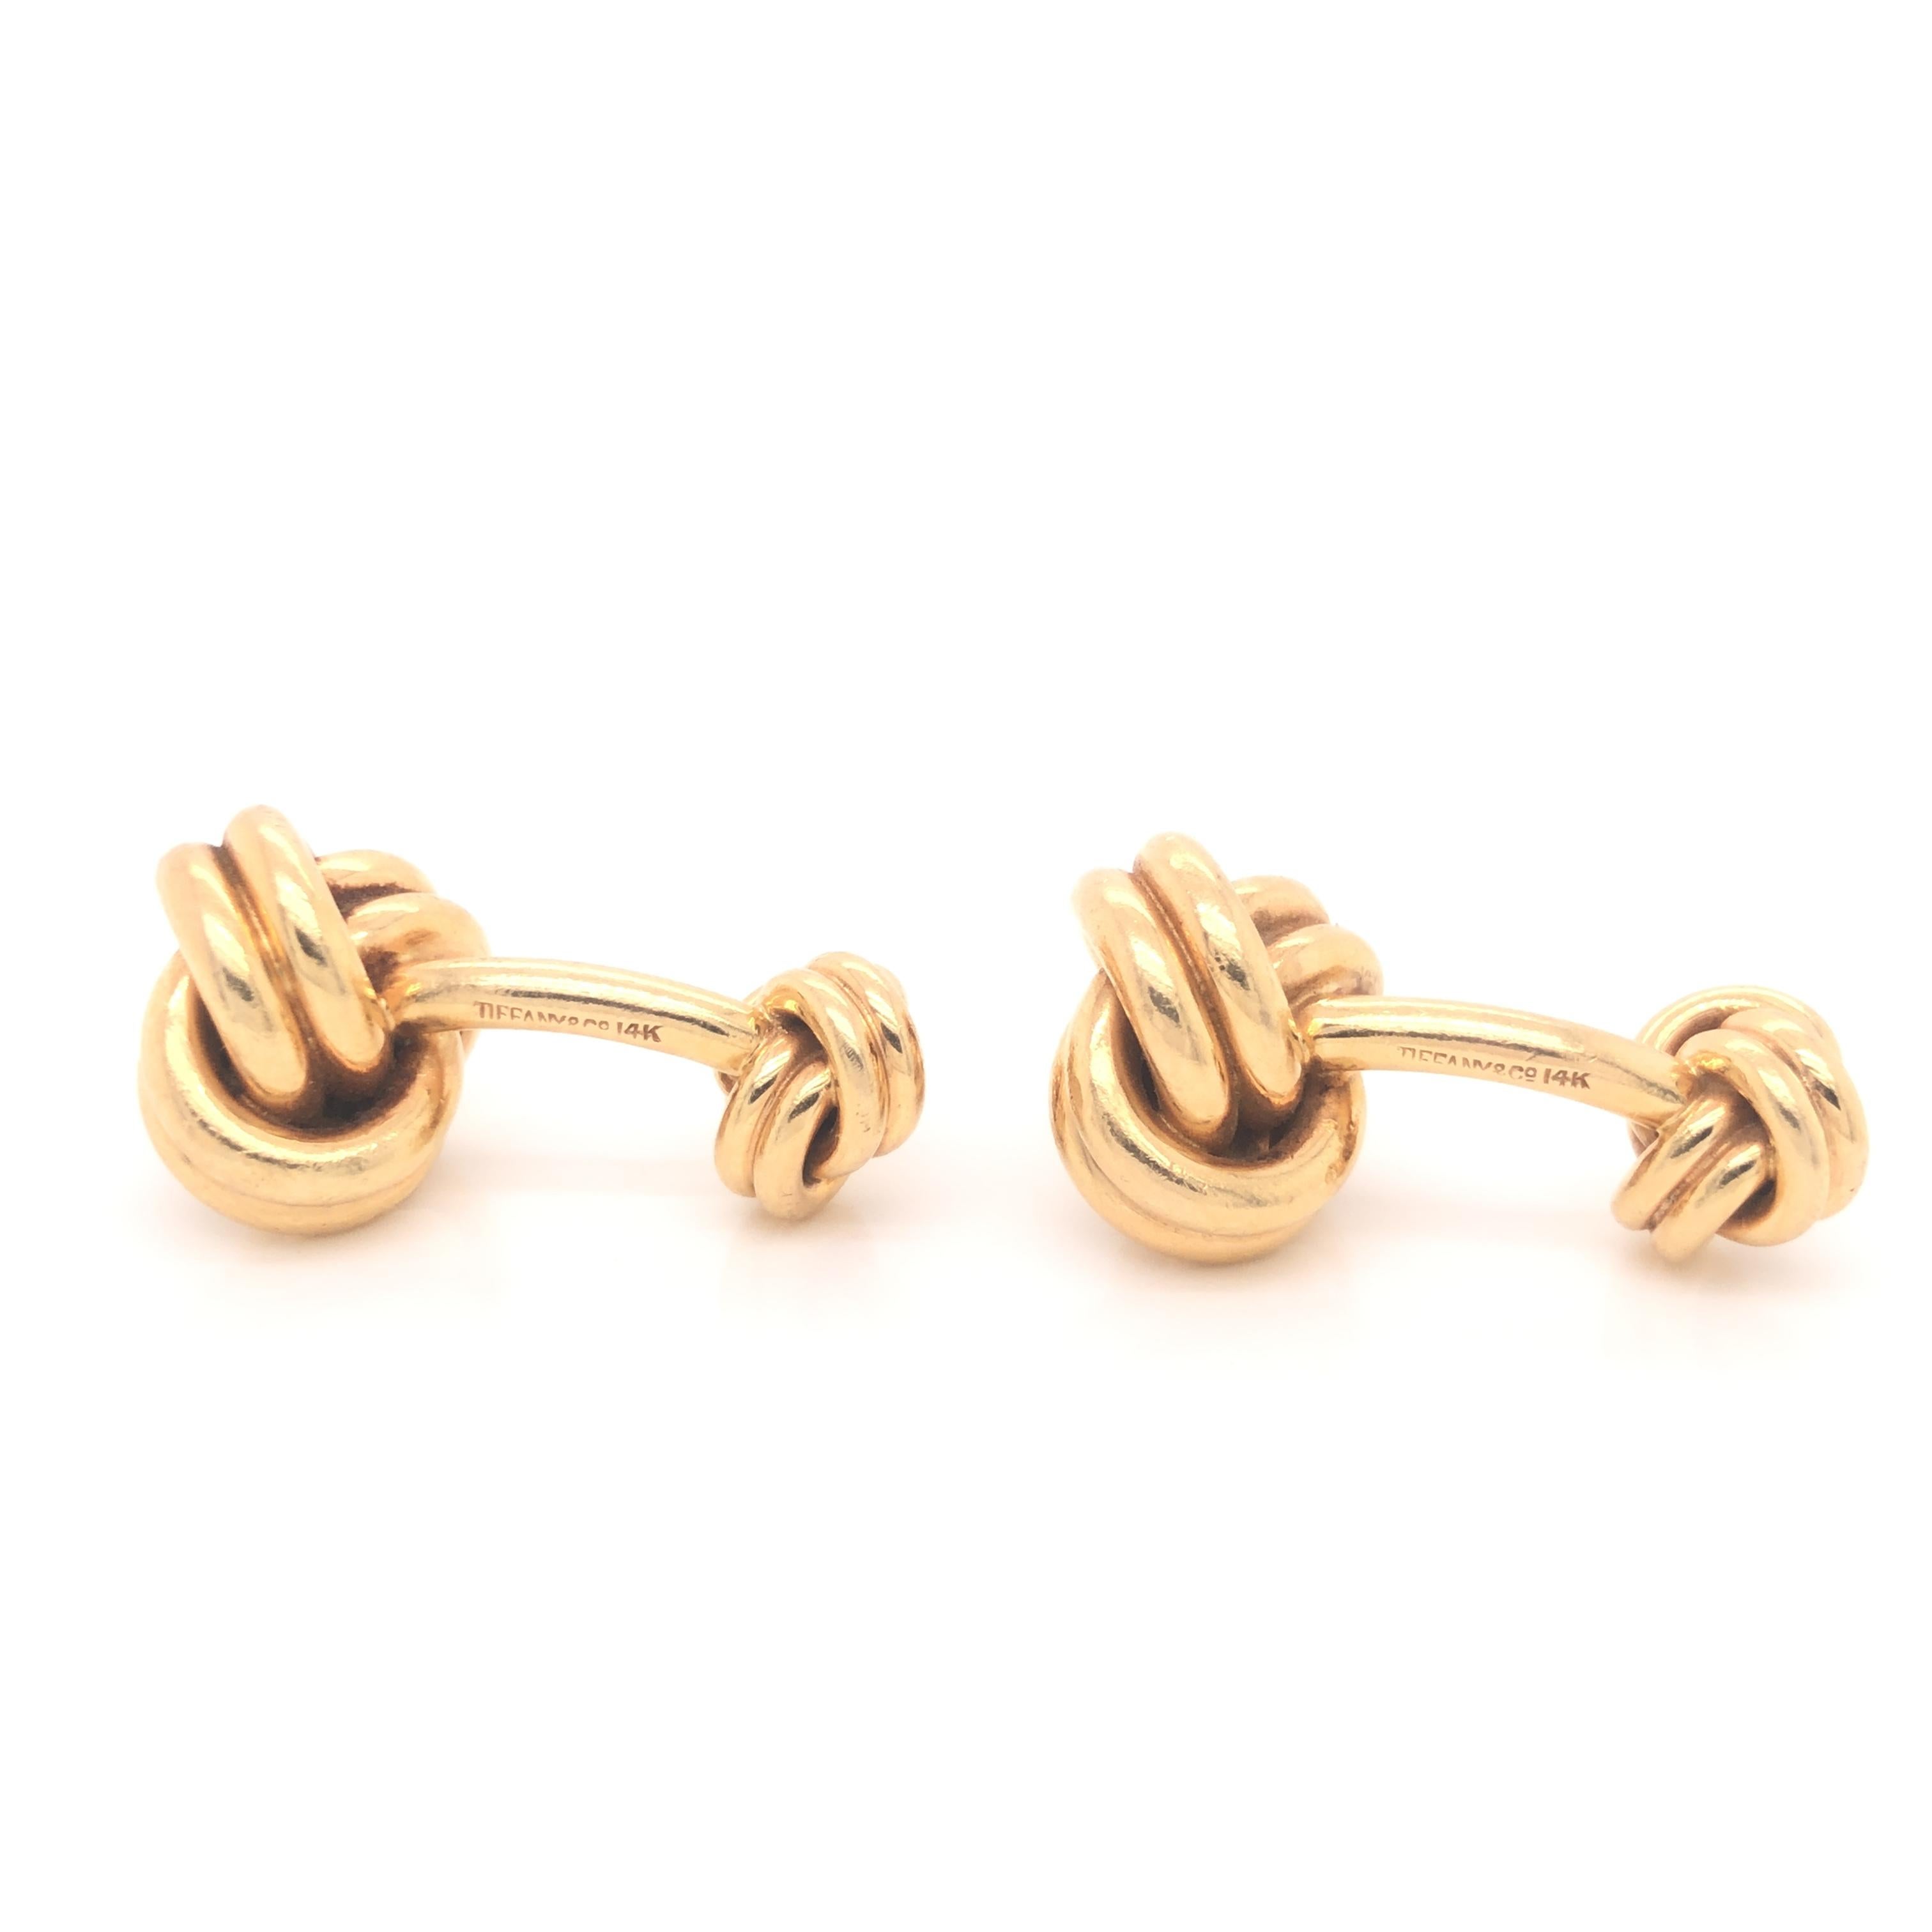 Tiffany & Co. Knot Cufflinks
Vintage Tiffany & Co. 14K yellow classic double sided love knot cufflinks.
Approximate Measurements: Length: 1.1